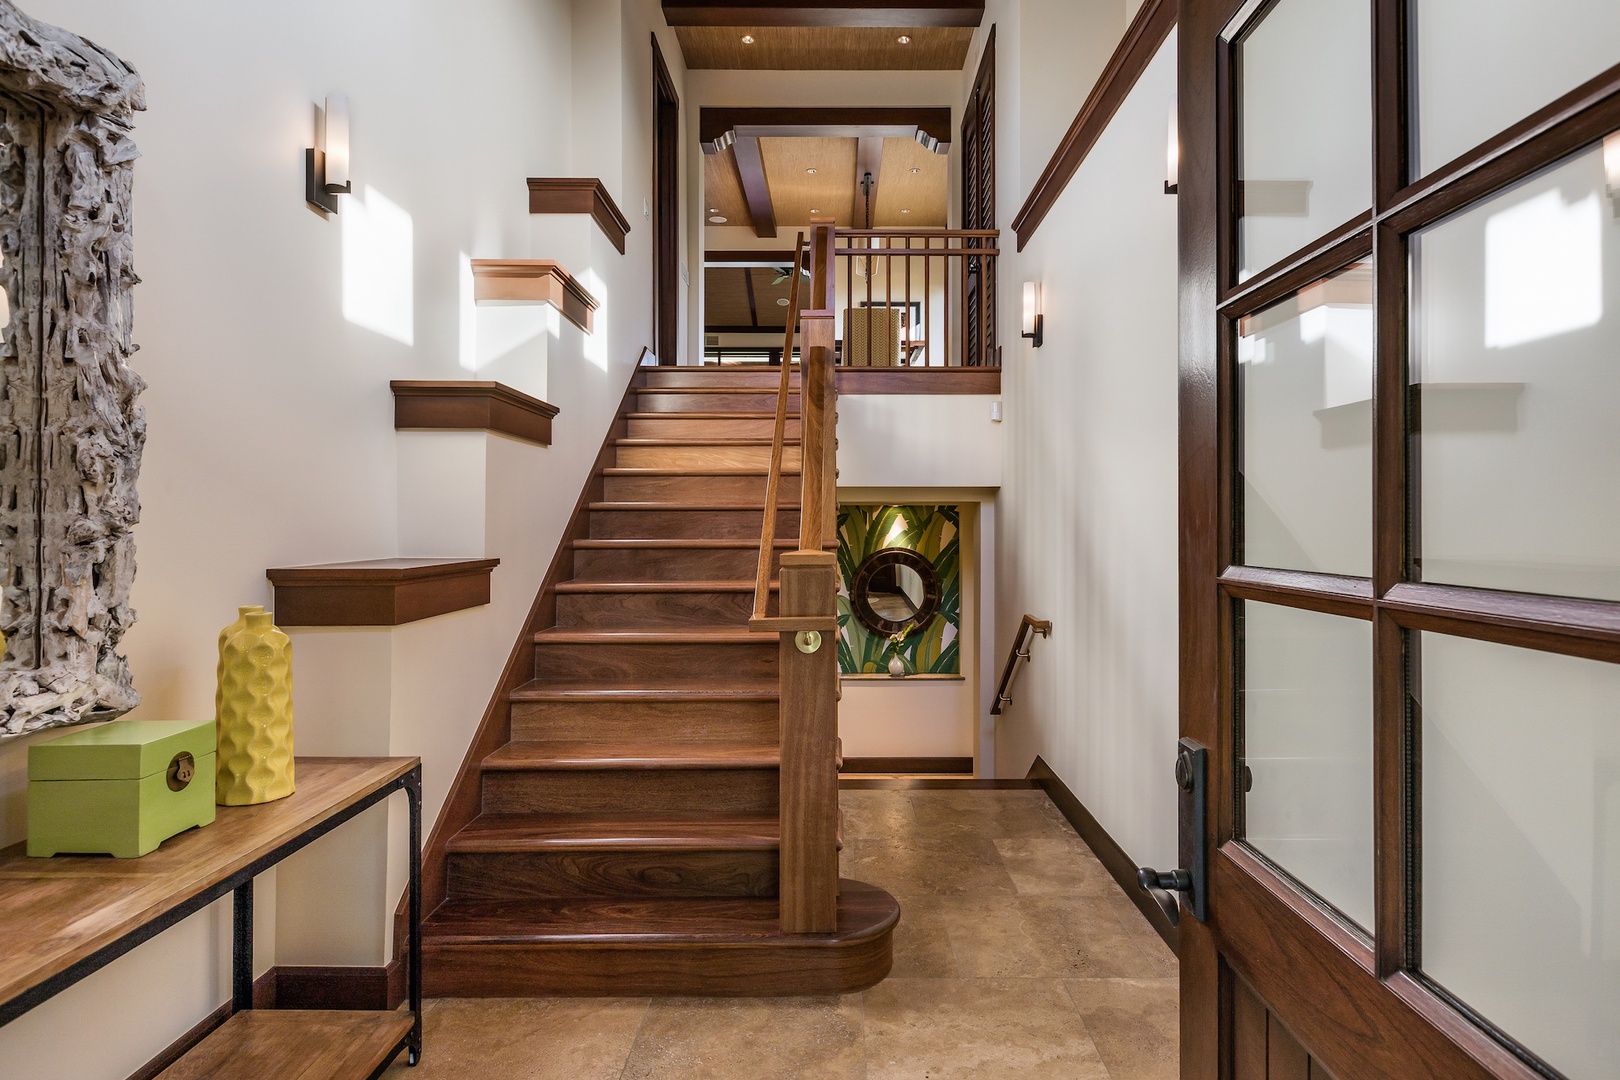 Kailua Kona Vacation Rentals, 3BD Hali'ipua Villa (108) at Four Seasons Resort at Hualalai - The elegant foyer and staircase greets you upon your entrance. Great room and kitchen are upstairs, bedrooms are downstairs.